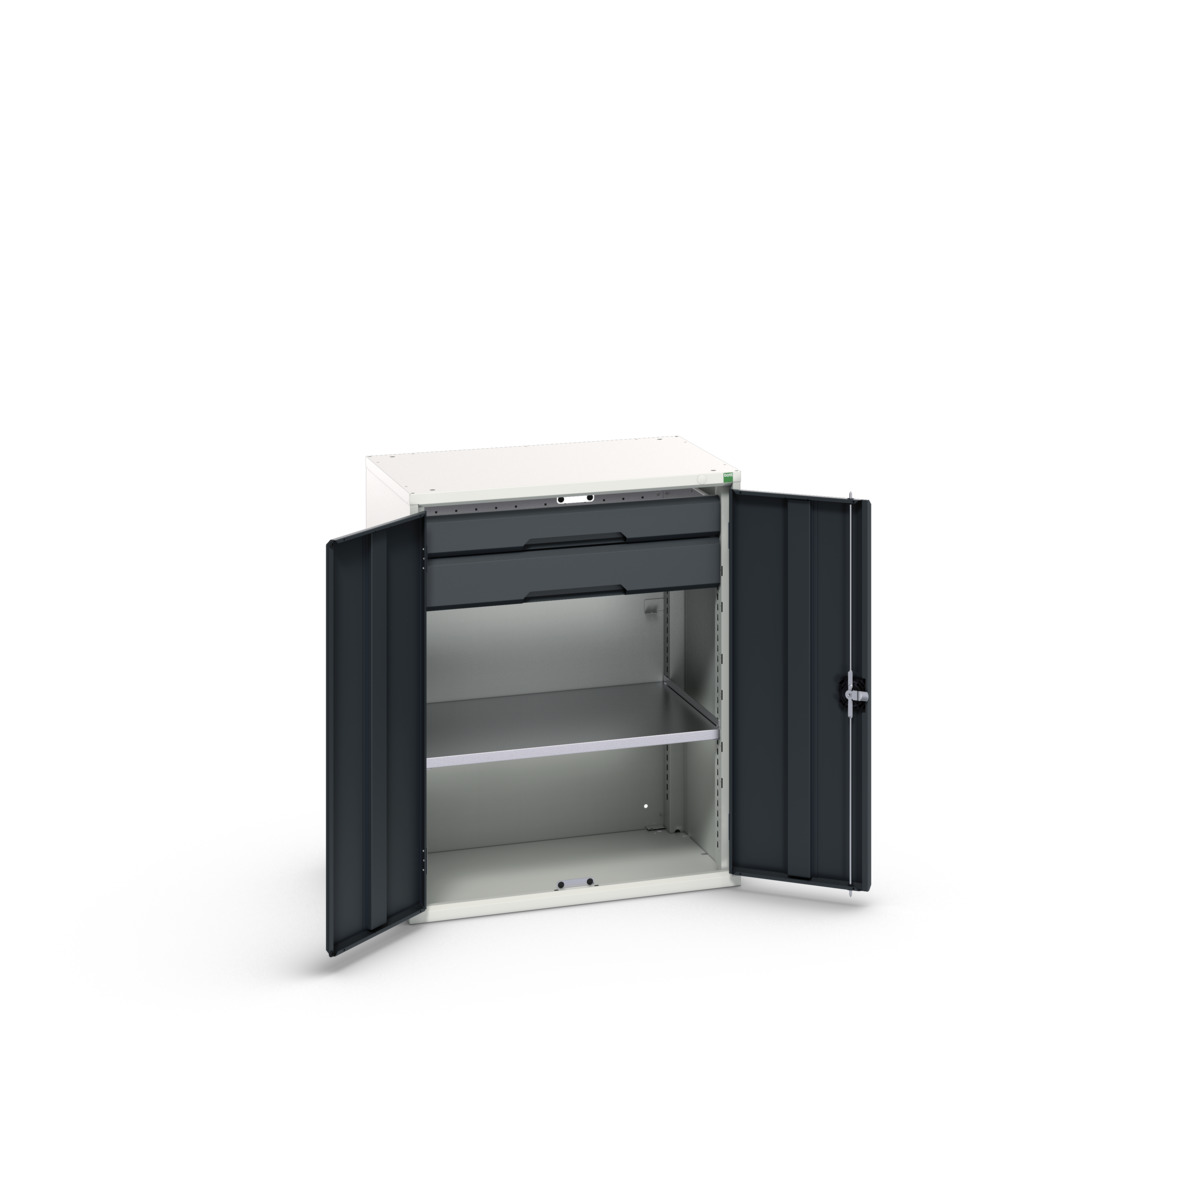 16926453. - verso kitted cupboard